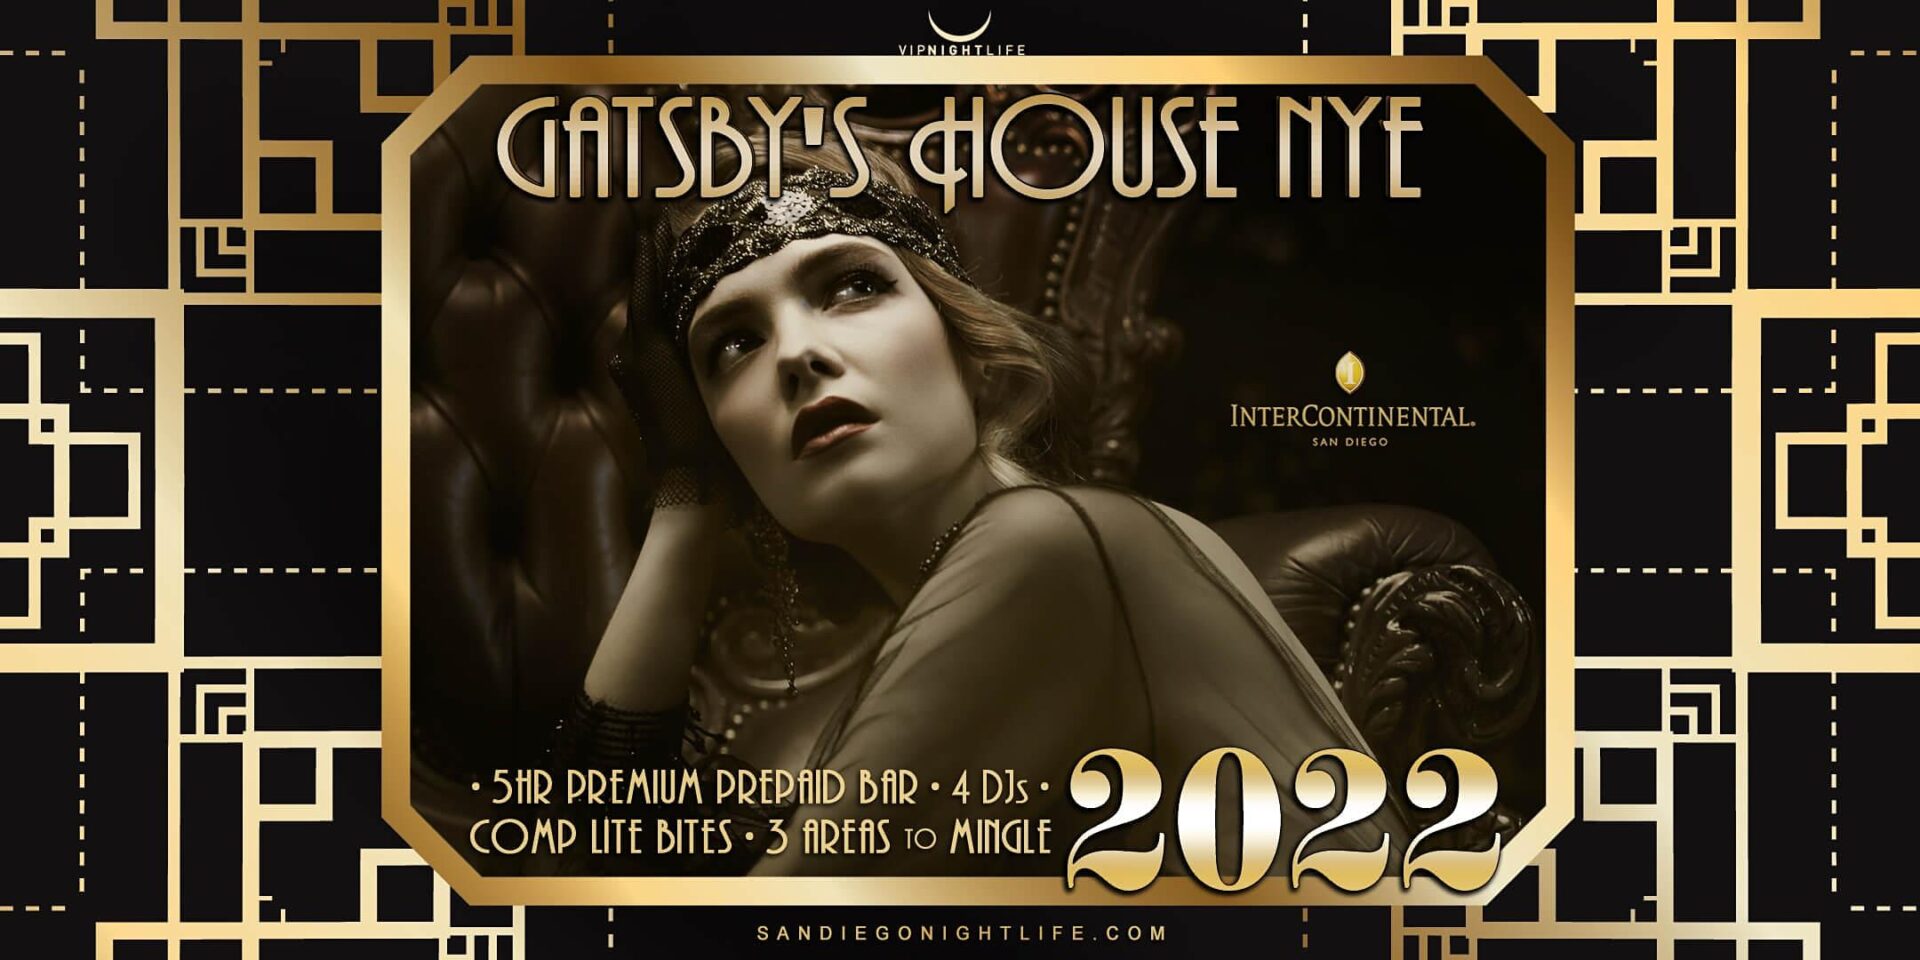 2022 InterContinental San Diego New Year’s Eve Party Gatsby’s House